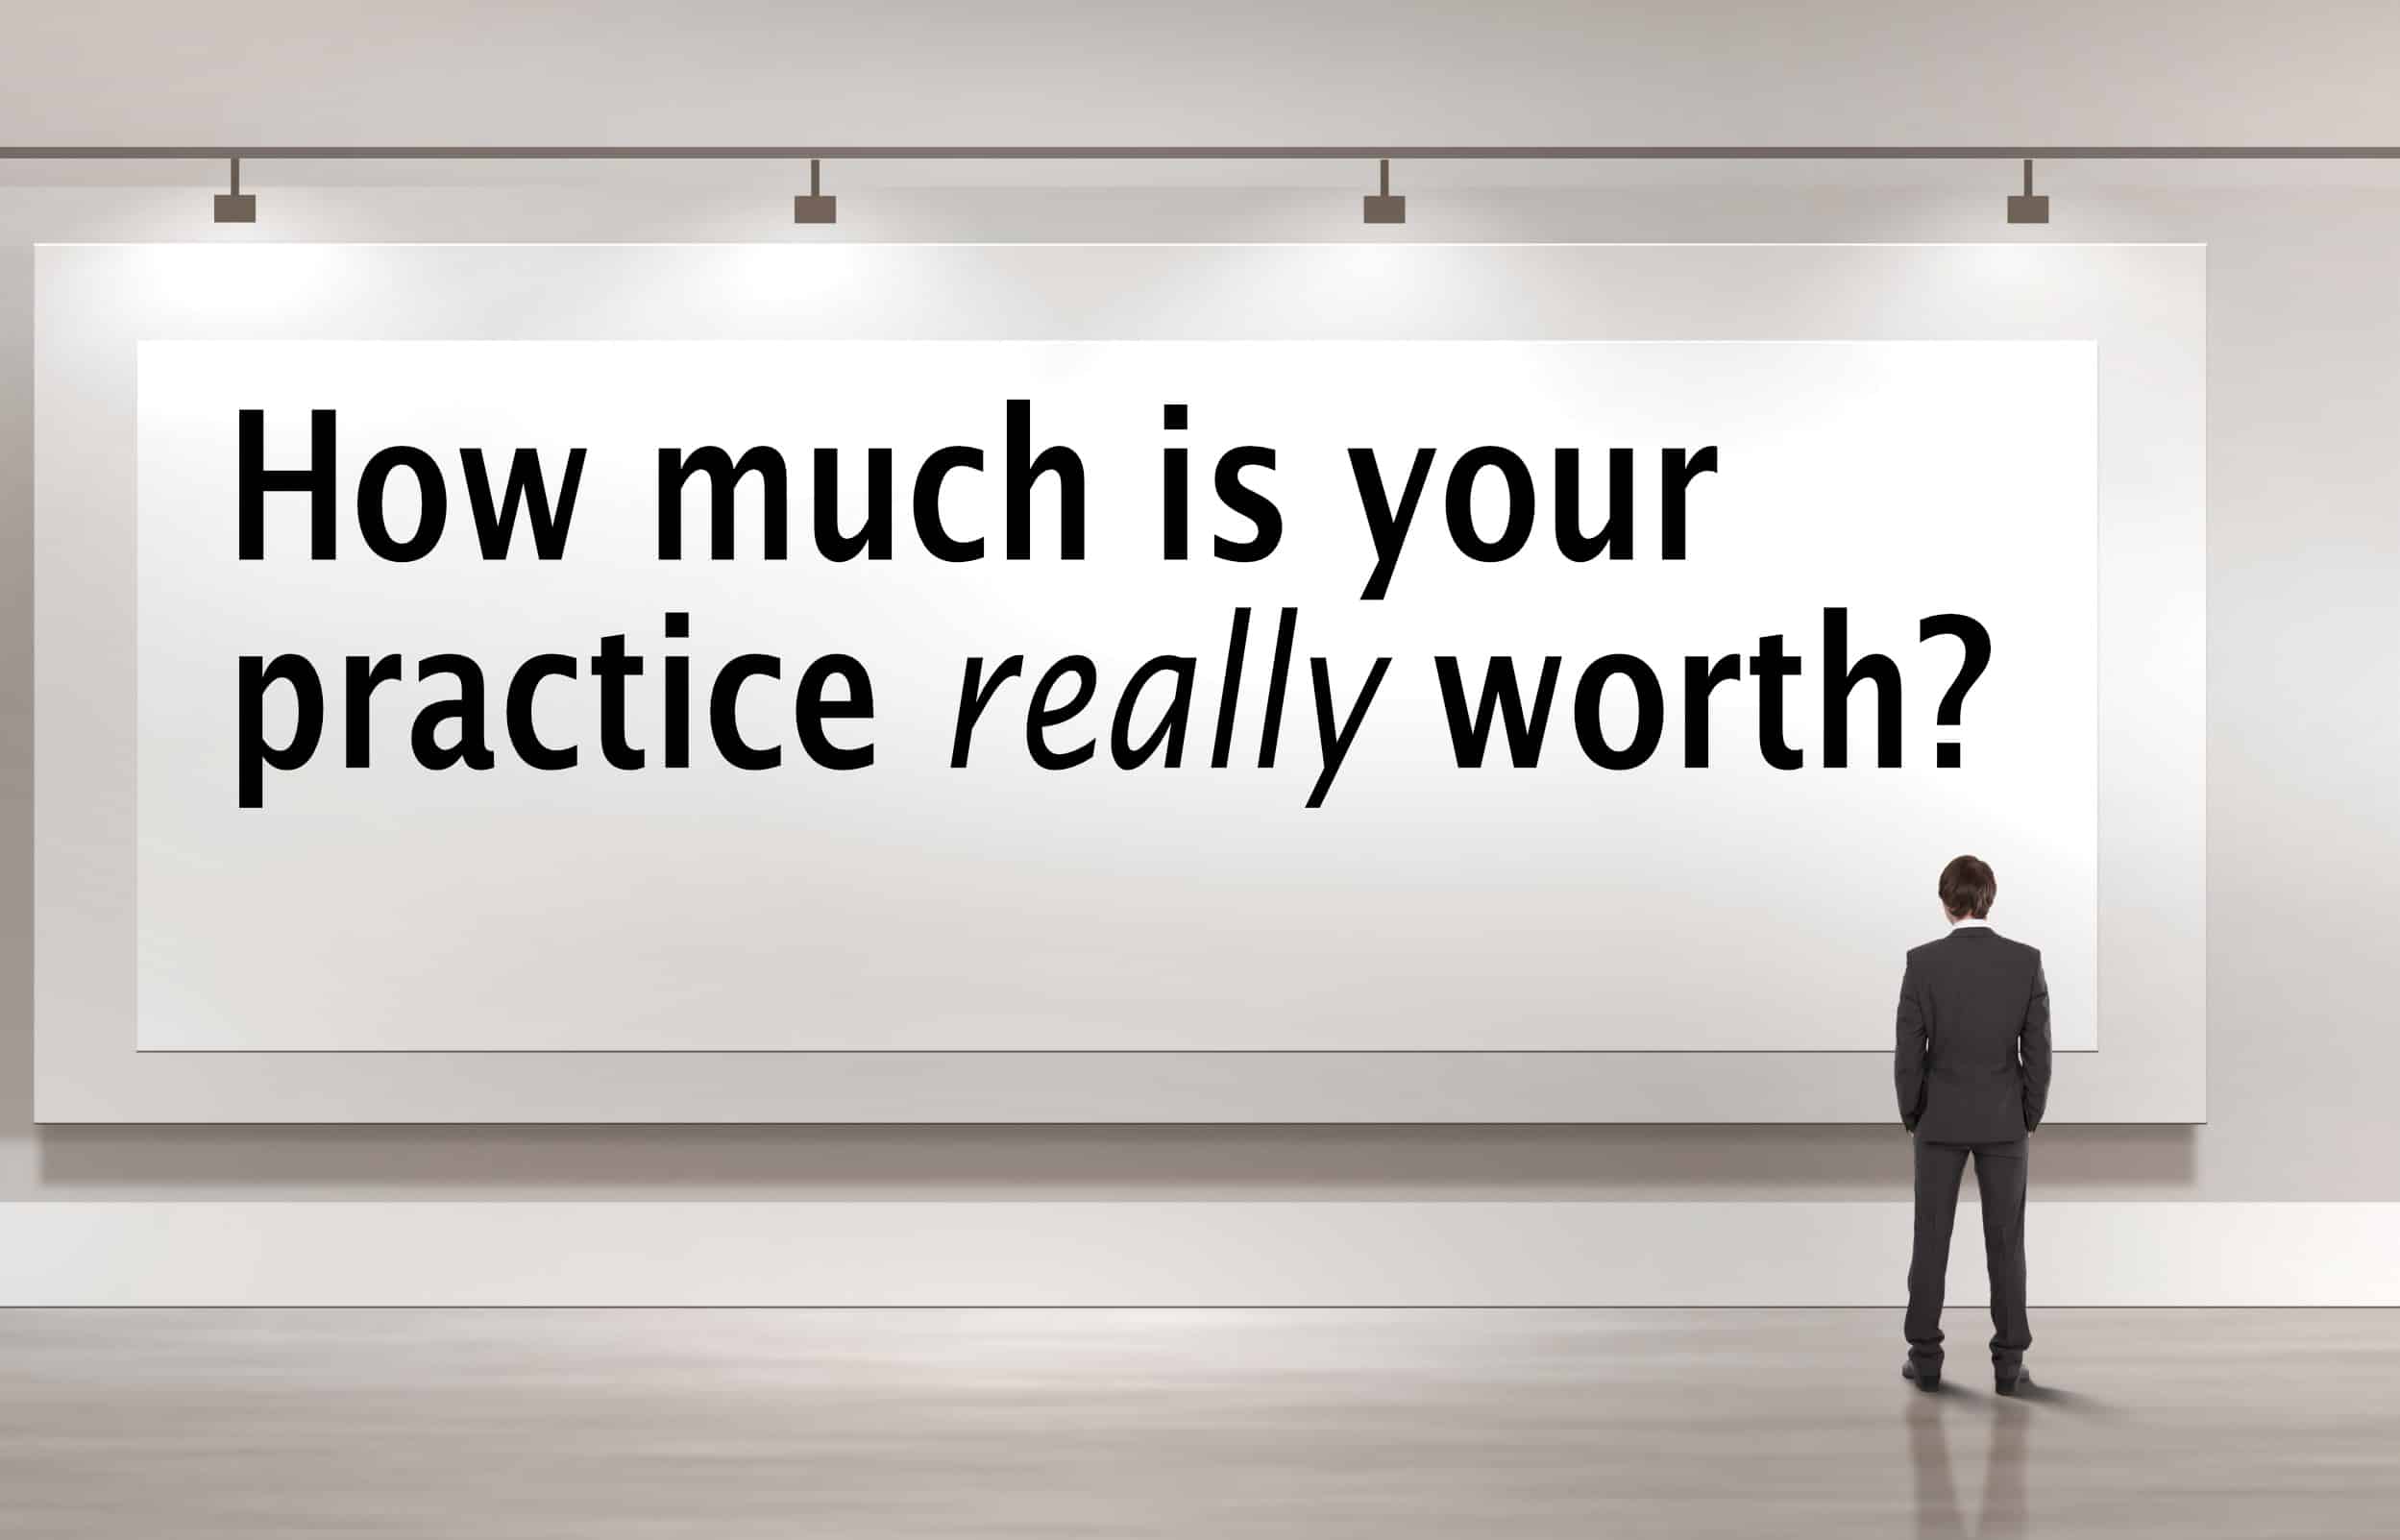 photograph of a man in front of a sign.  The sign reads "How much is your practice really worth?"